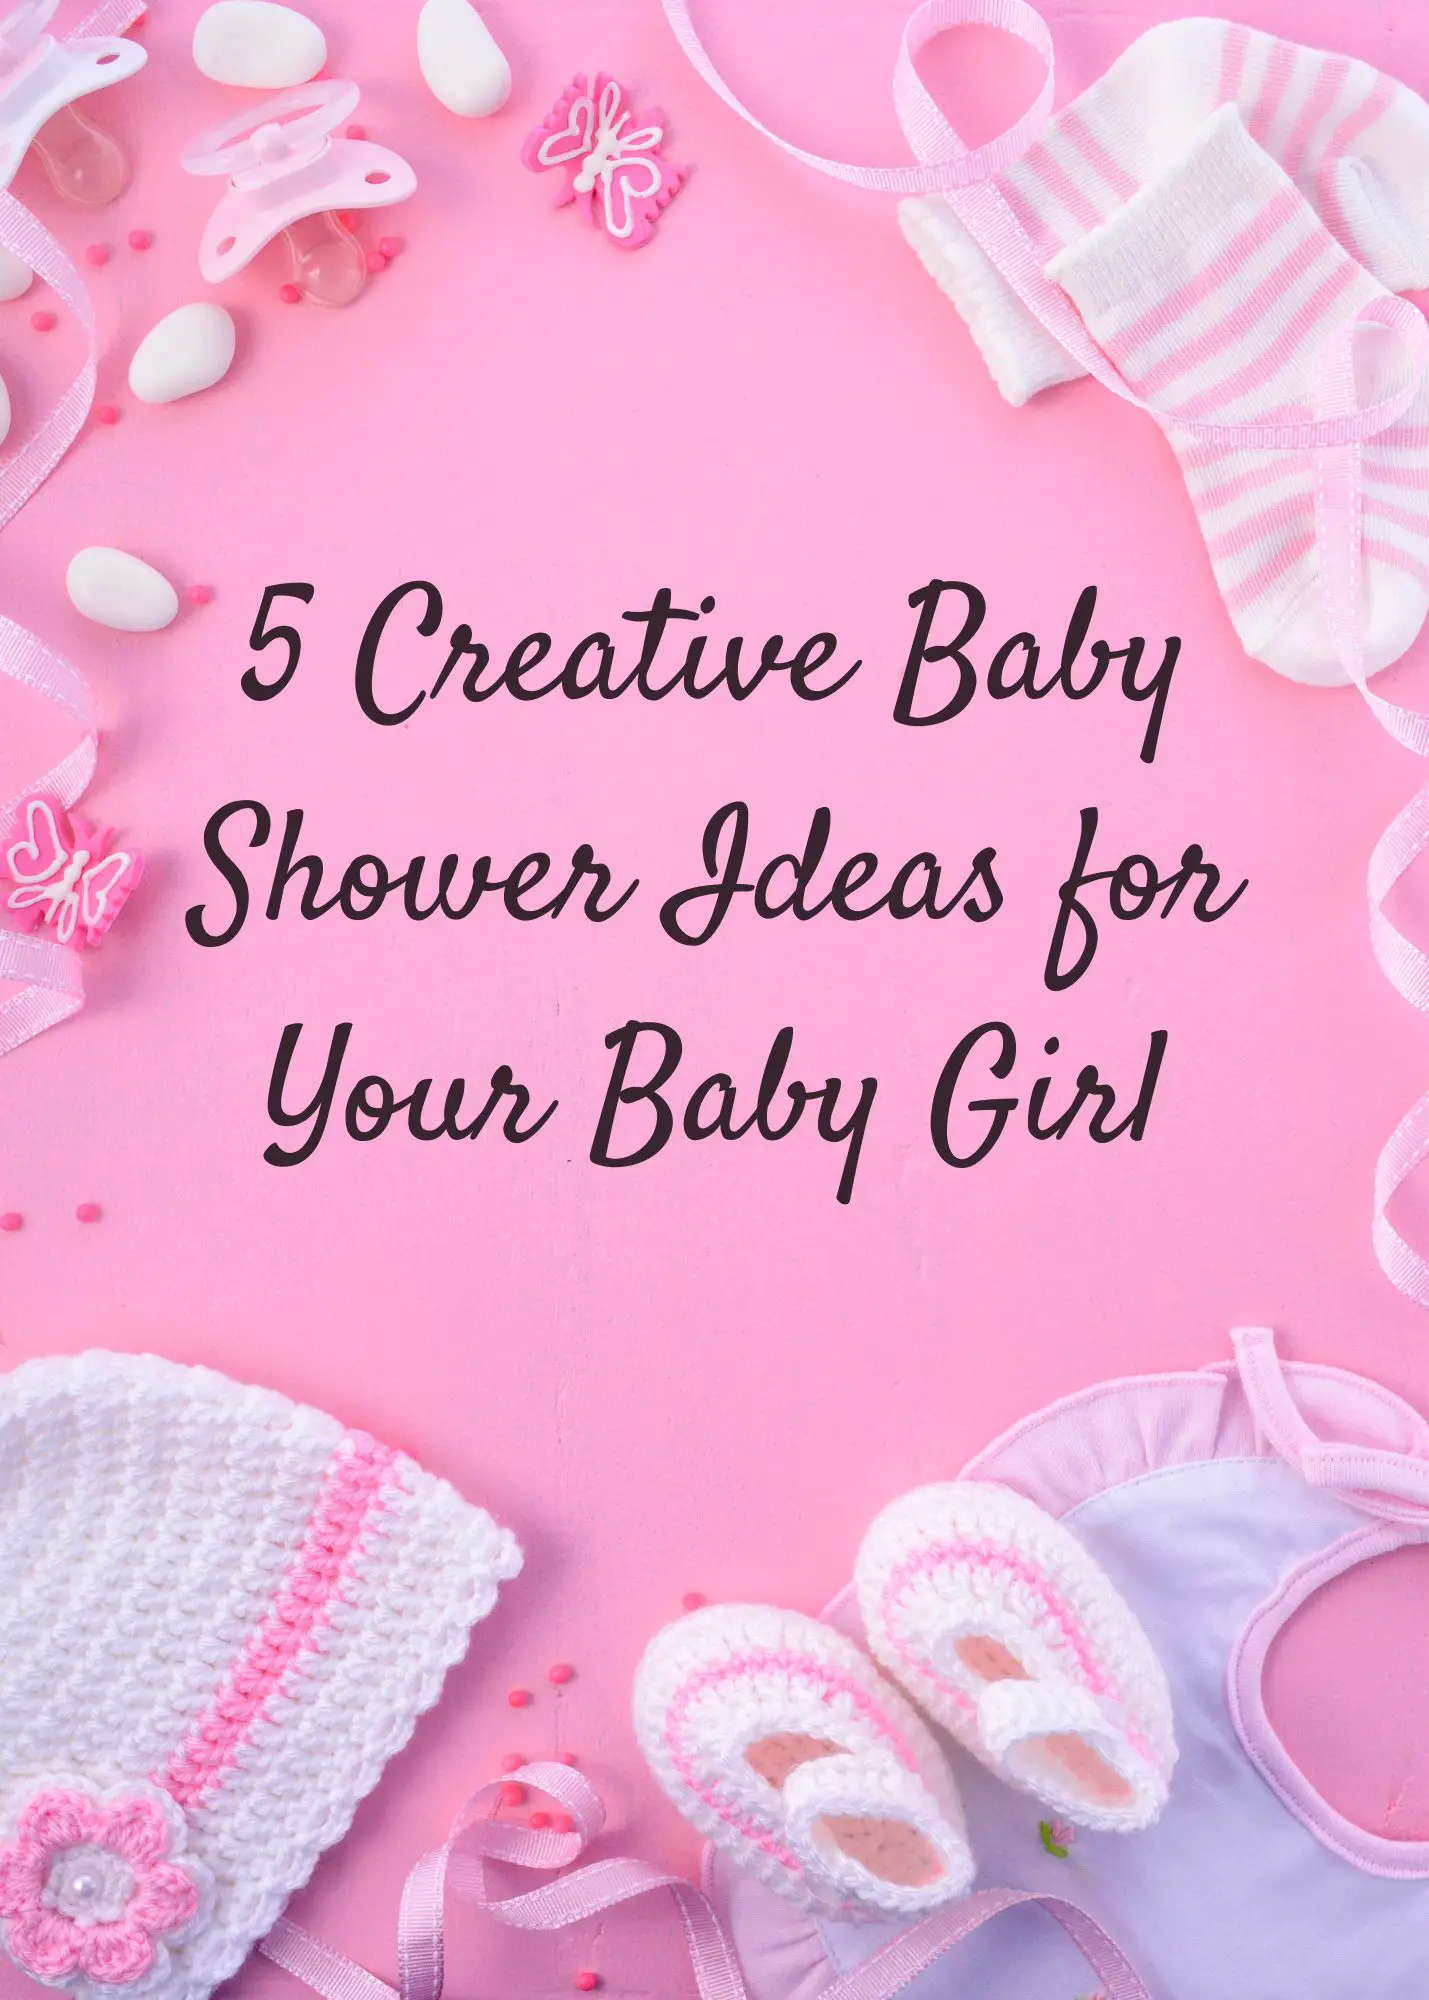 5 Creative Baby Shower Ideas for Your Baby Girl